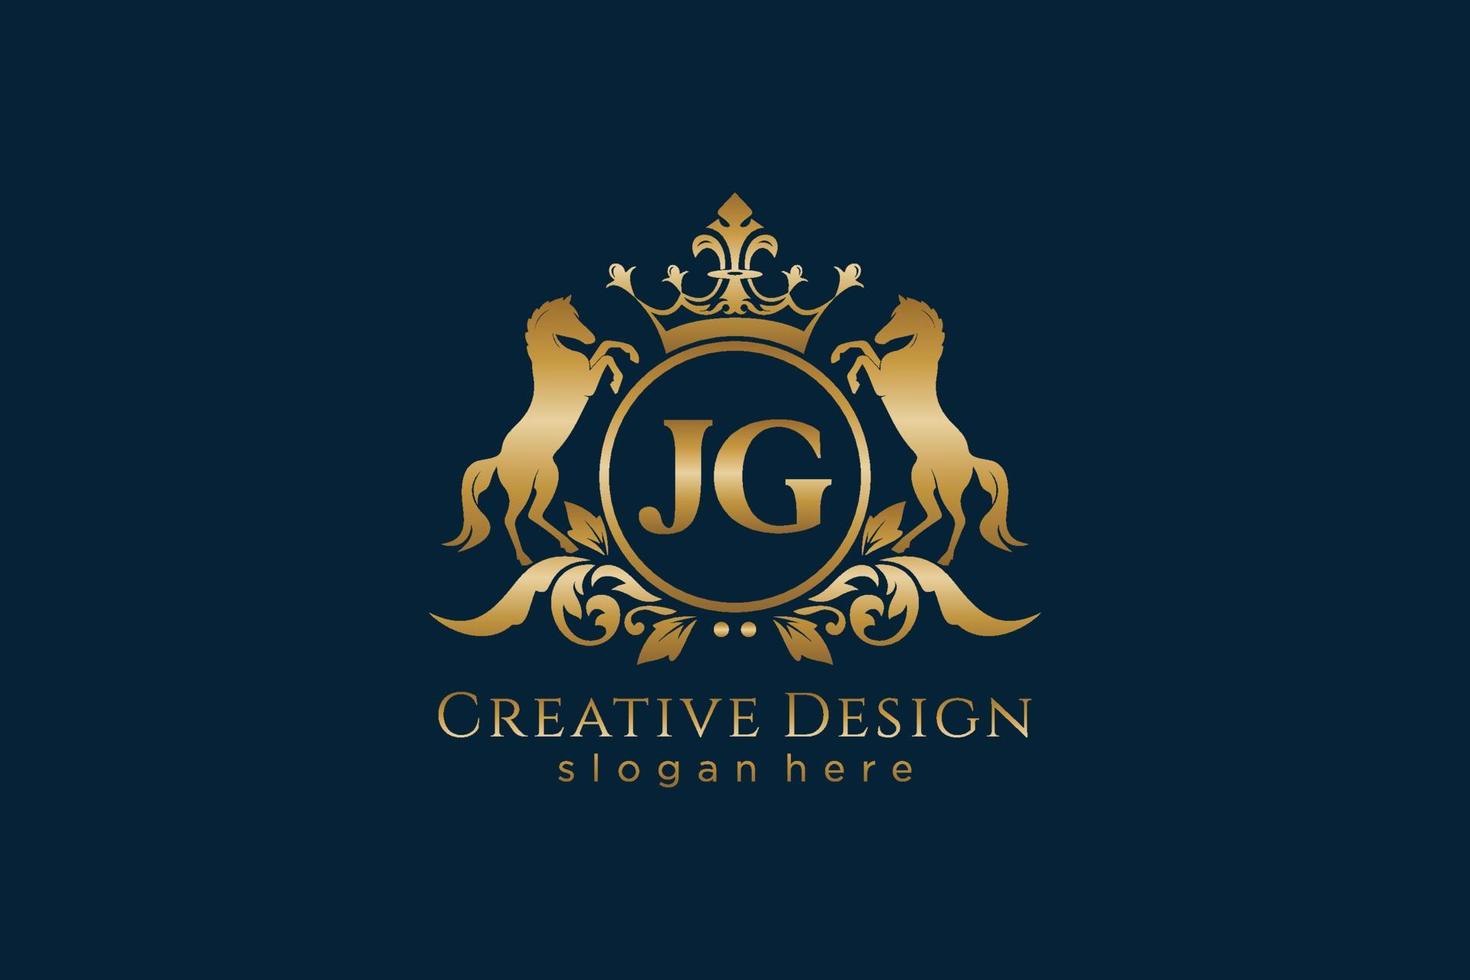 initial JG Retro golden crest with circle and two horses, badge template with scrolls and royal crown - perfect for luxurious branding projects vector